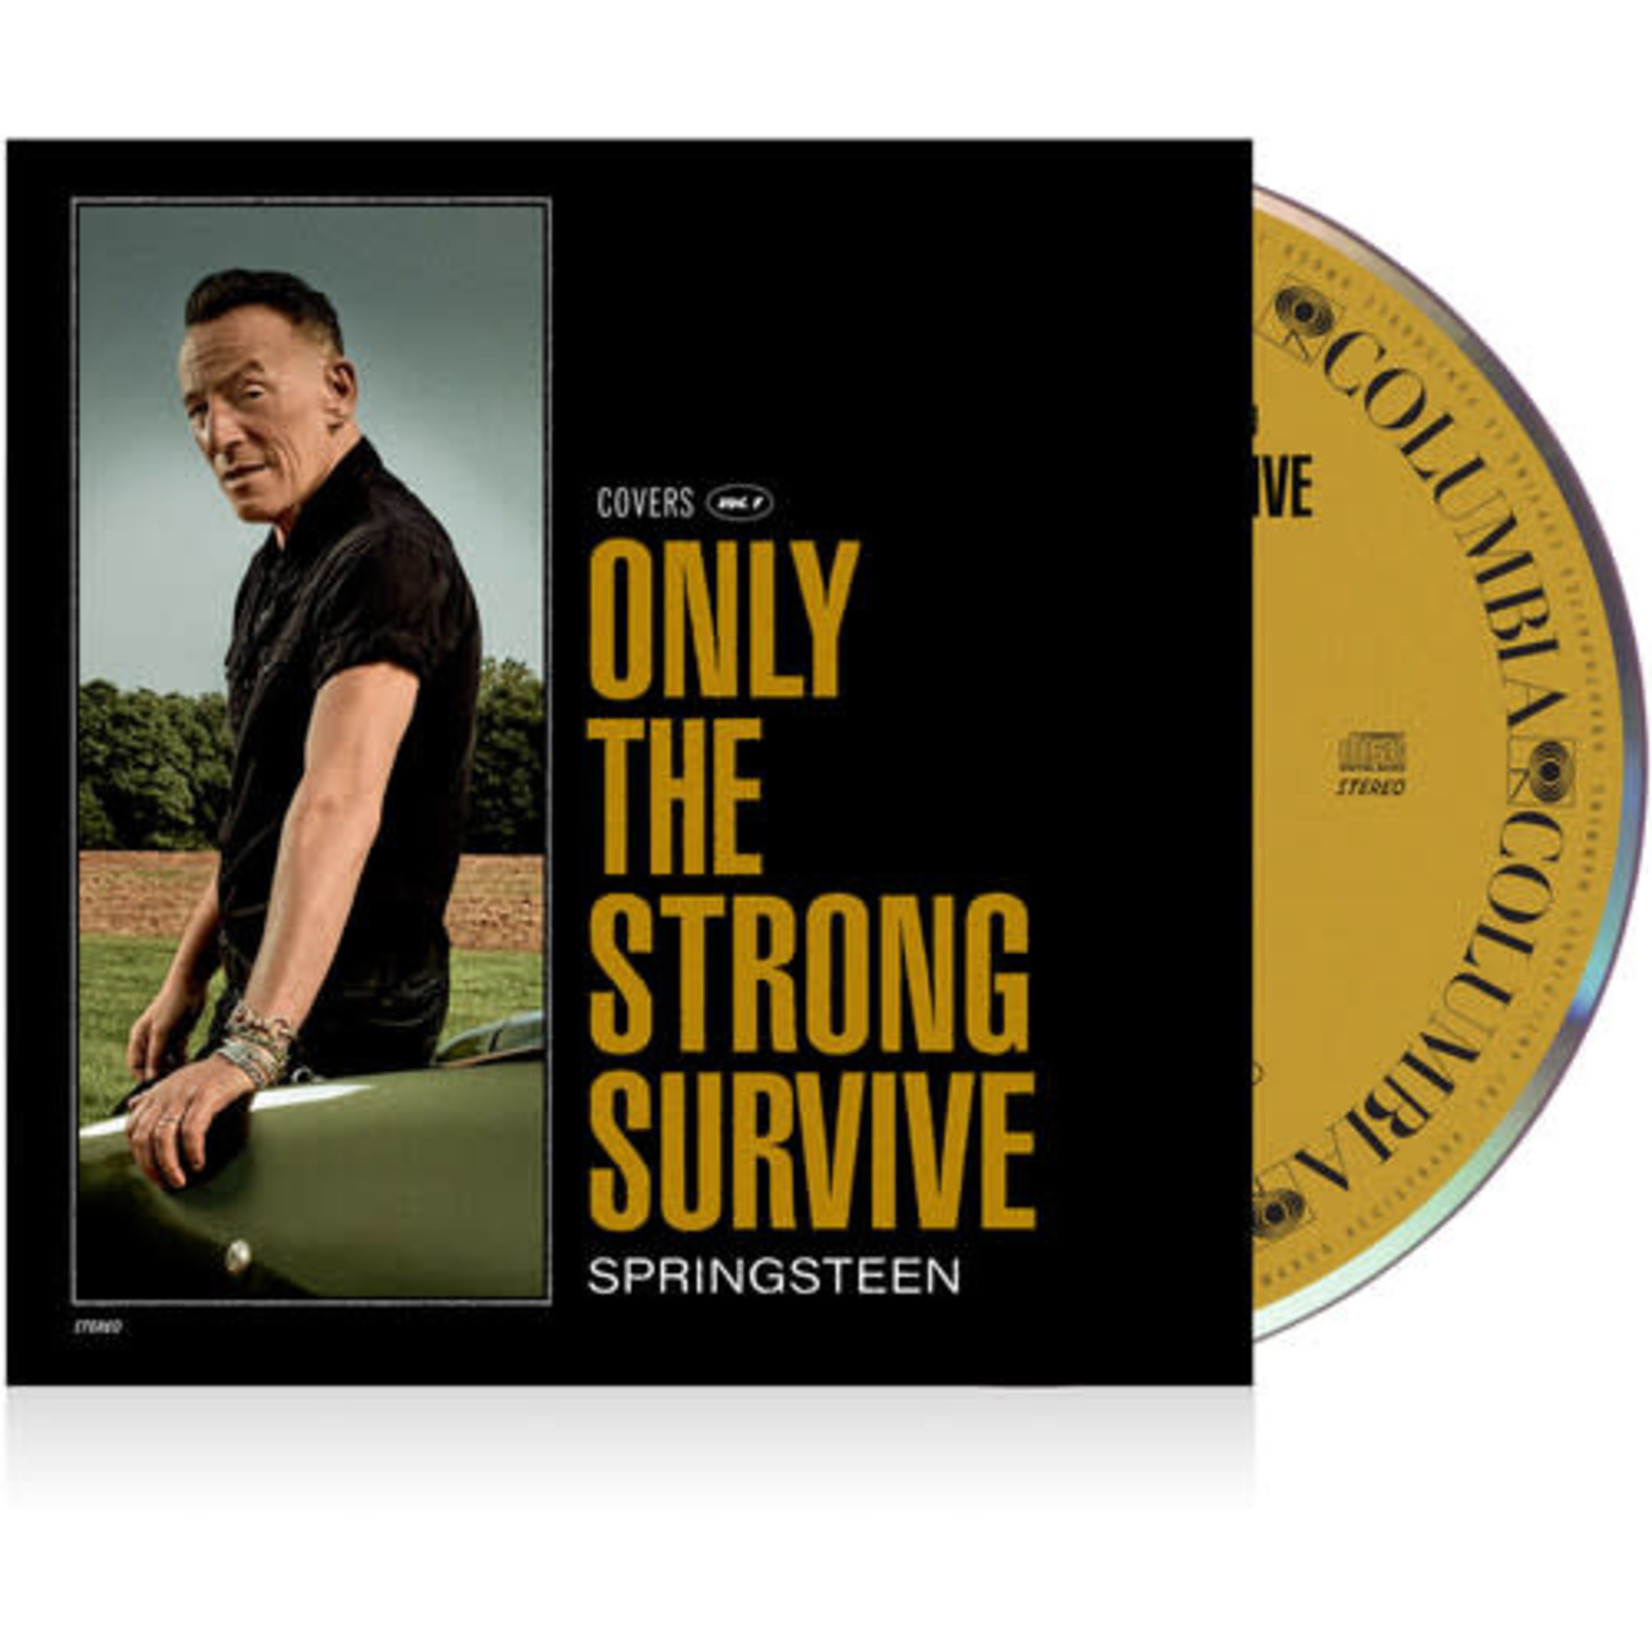 Bruce Springsteen - Only The Strong Survive [CD]